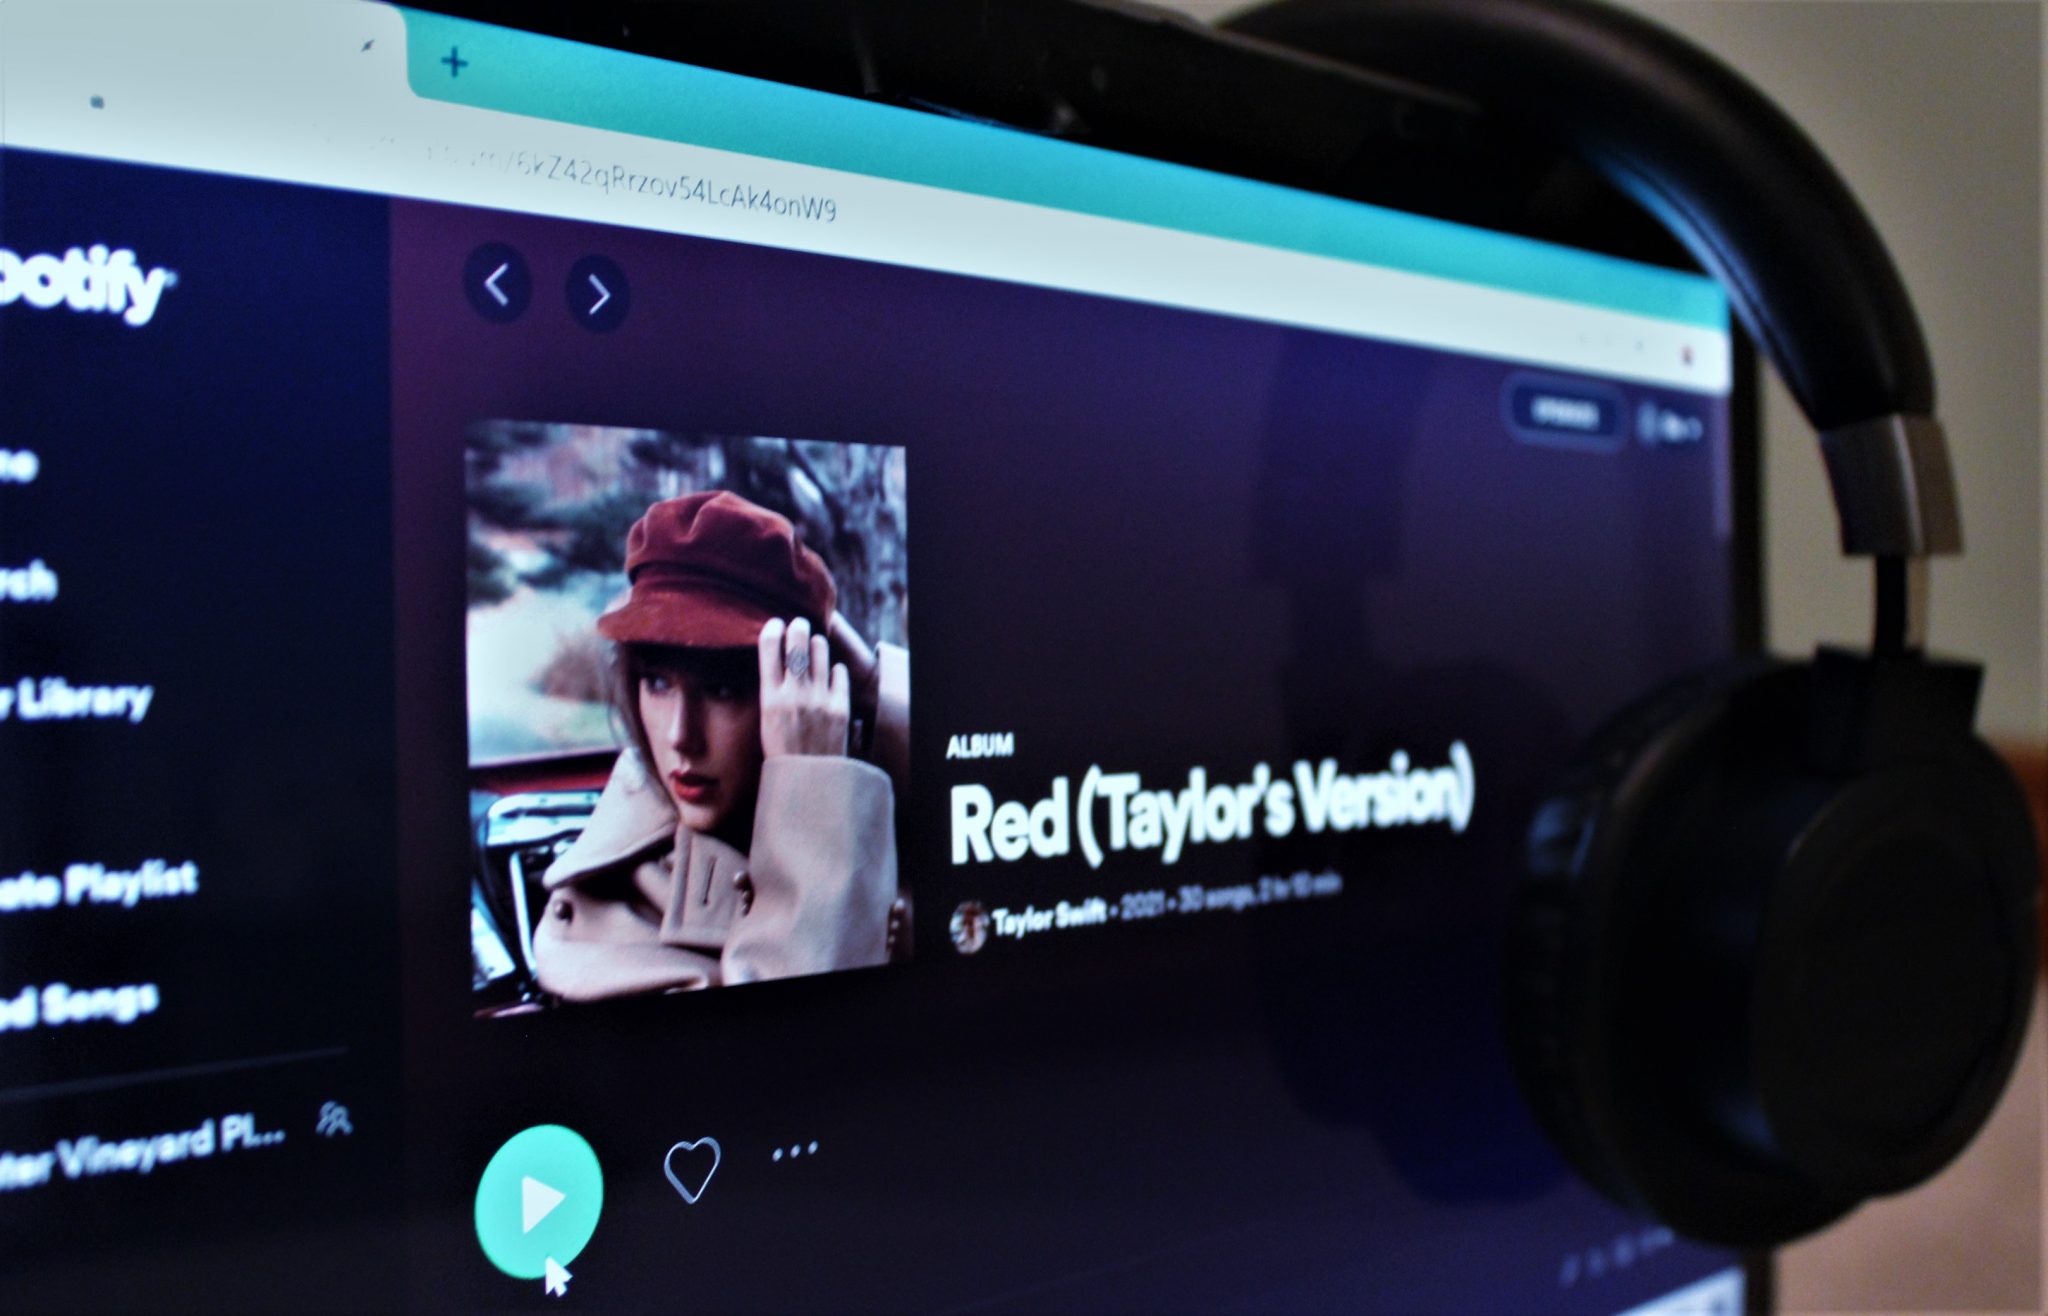 Red (Taylor's Version) on spotify